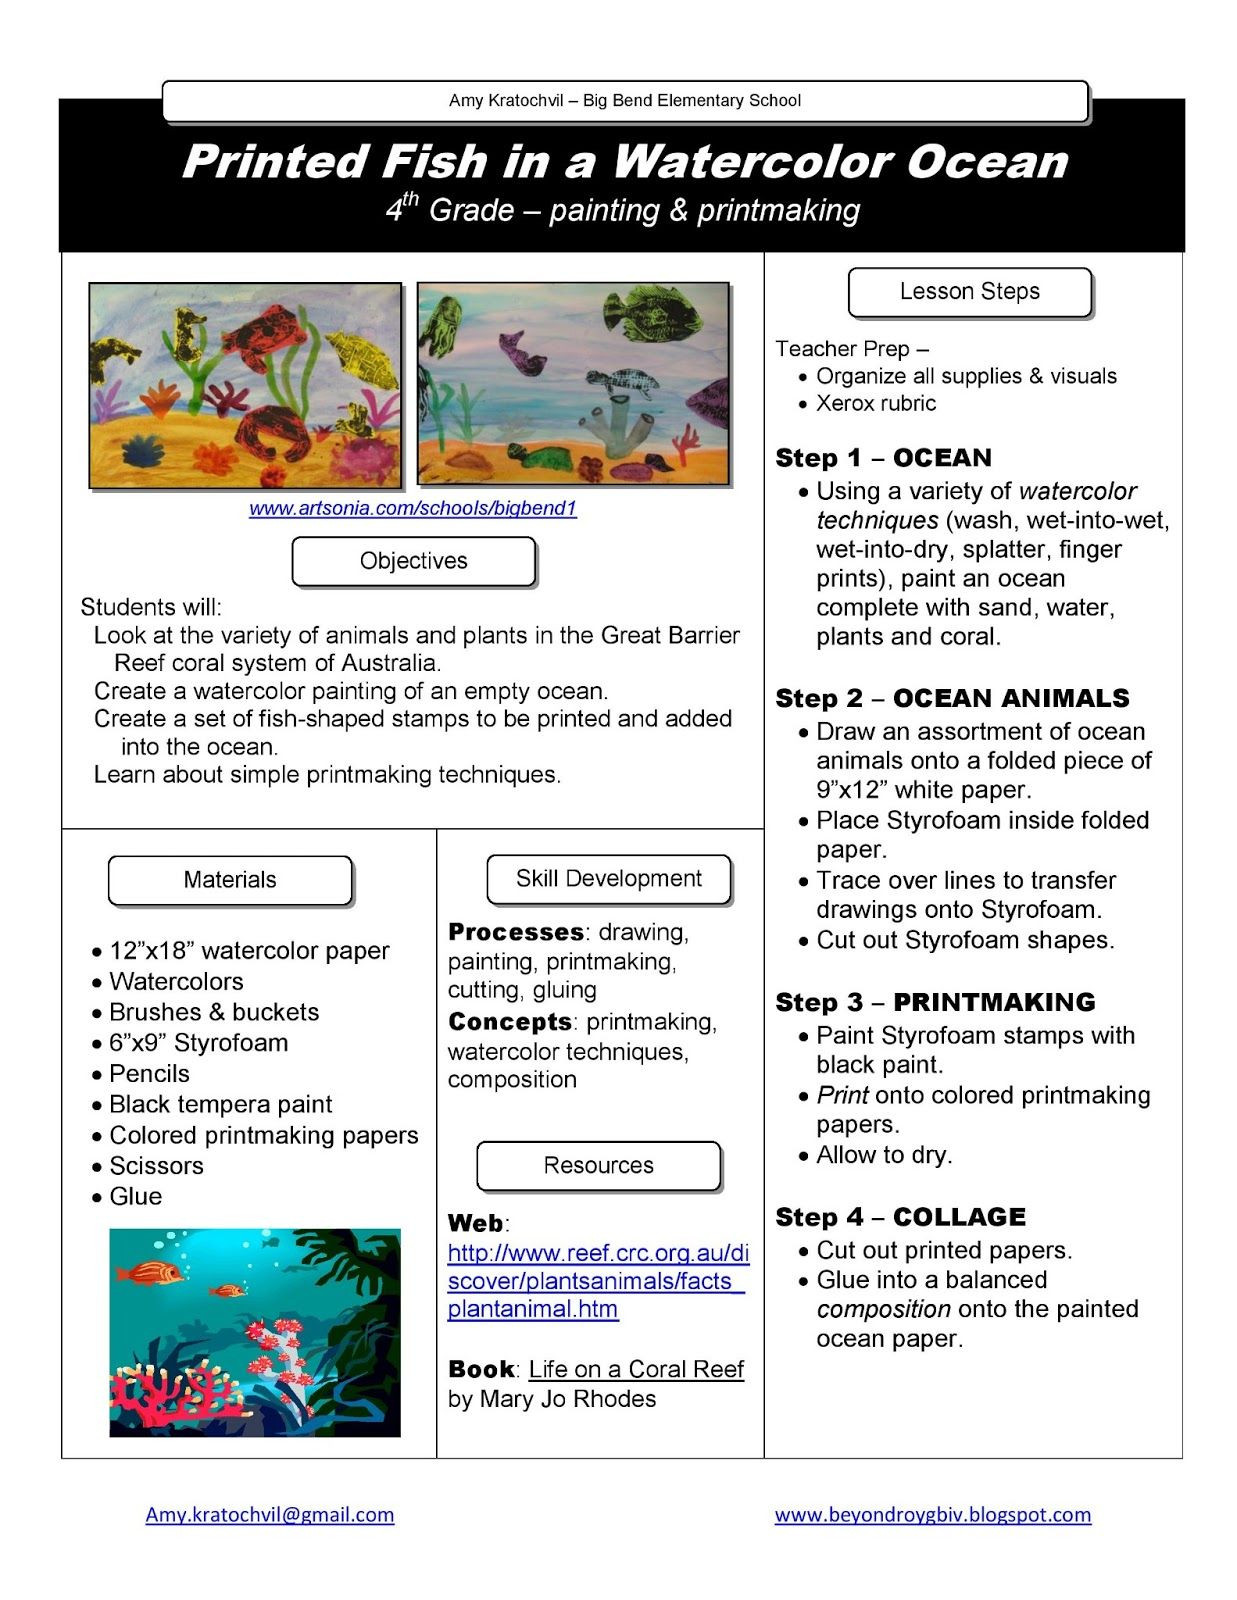 4th Grade Art Lesson Plans Printed Fish In A Watercolor Ocean Painting and